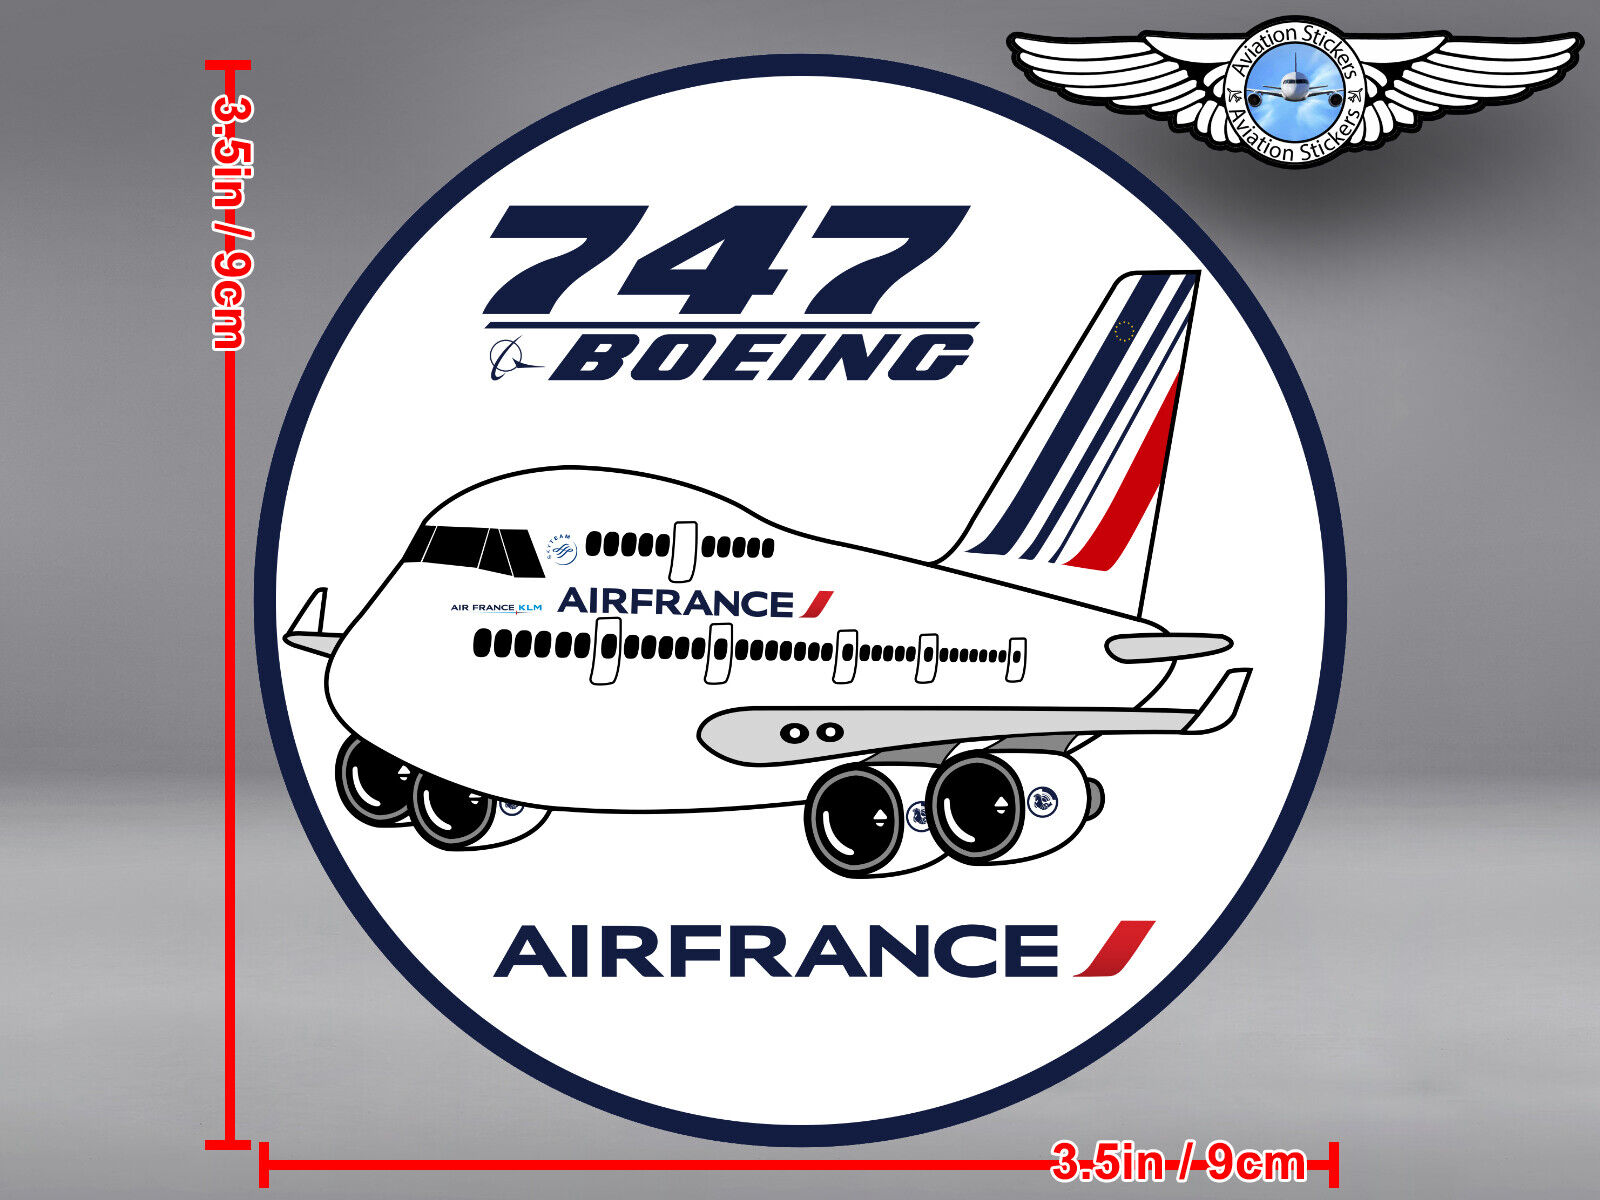 AIR FRANCE PUDGY BOEING B747 ROUND DECAL / STICKER